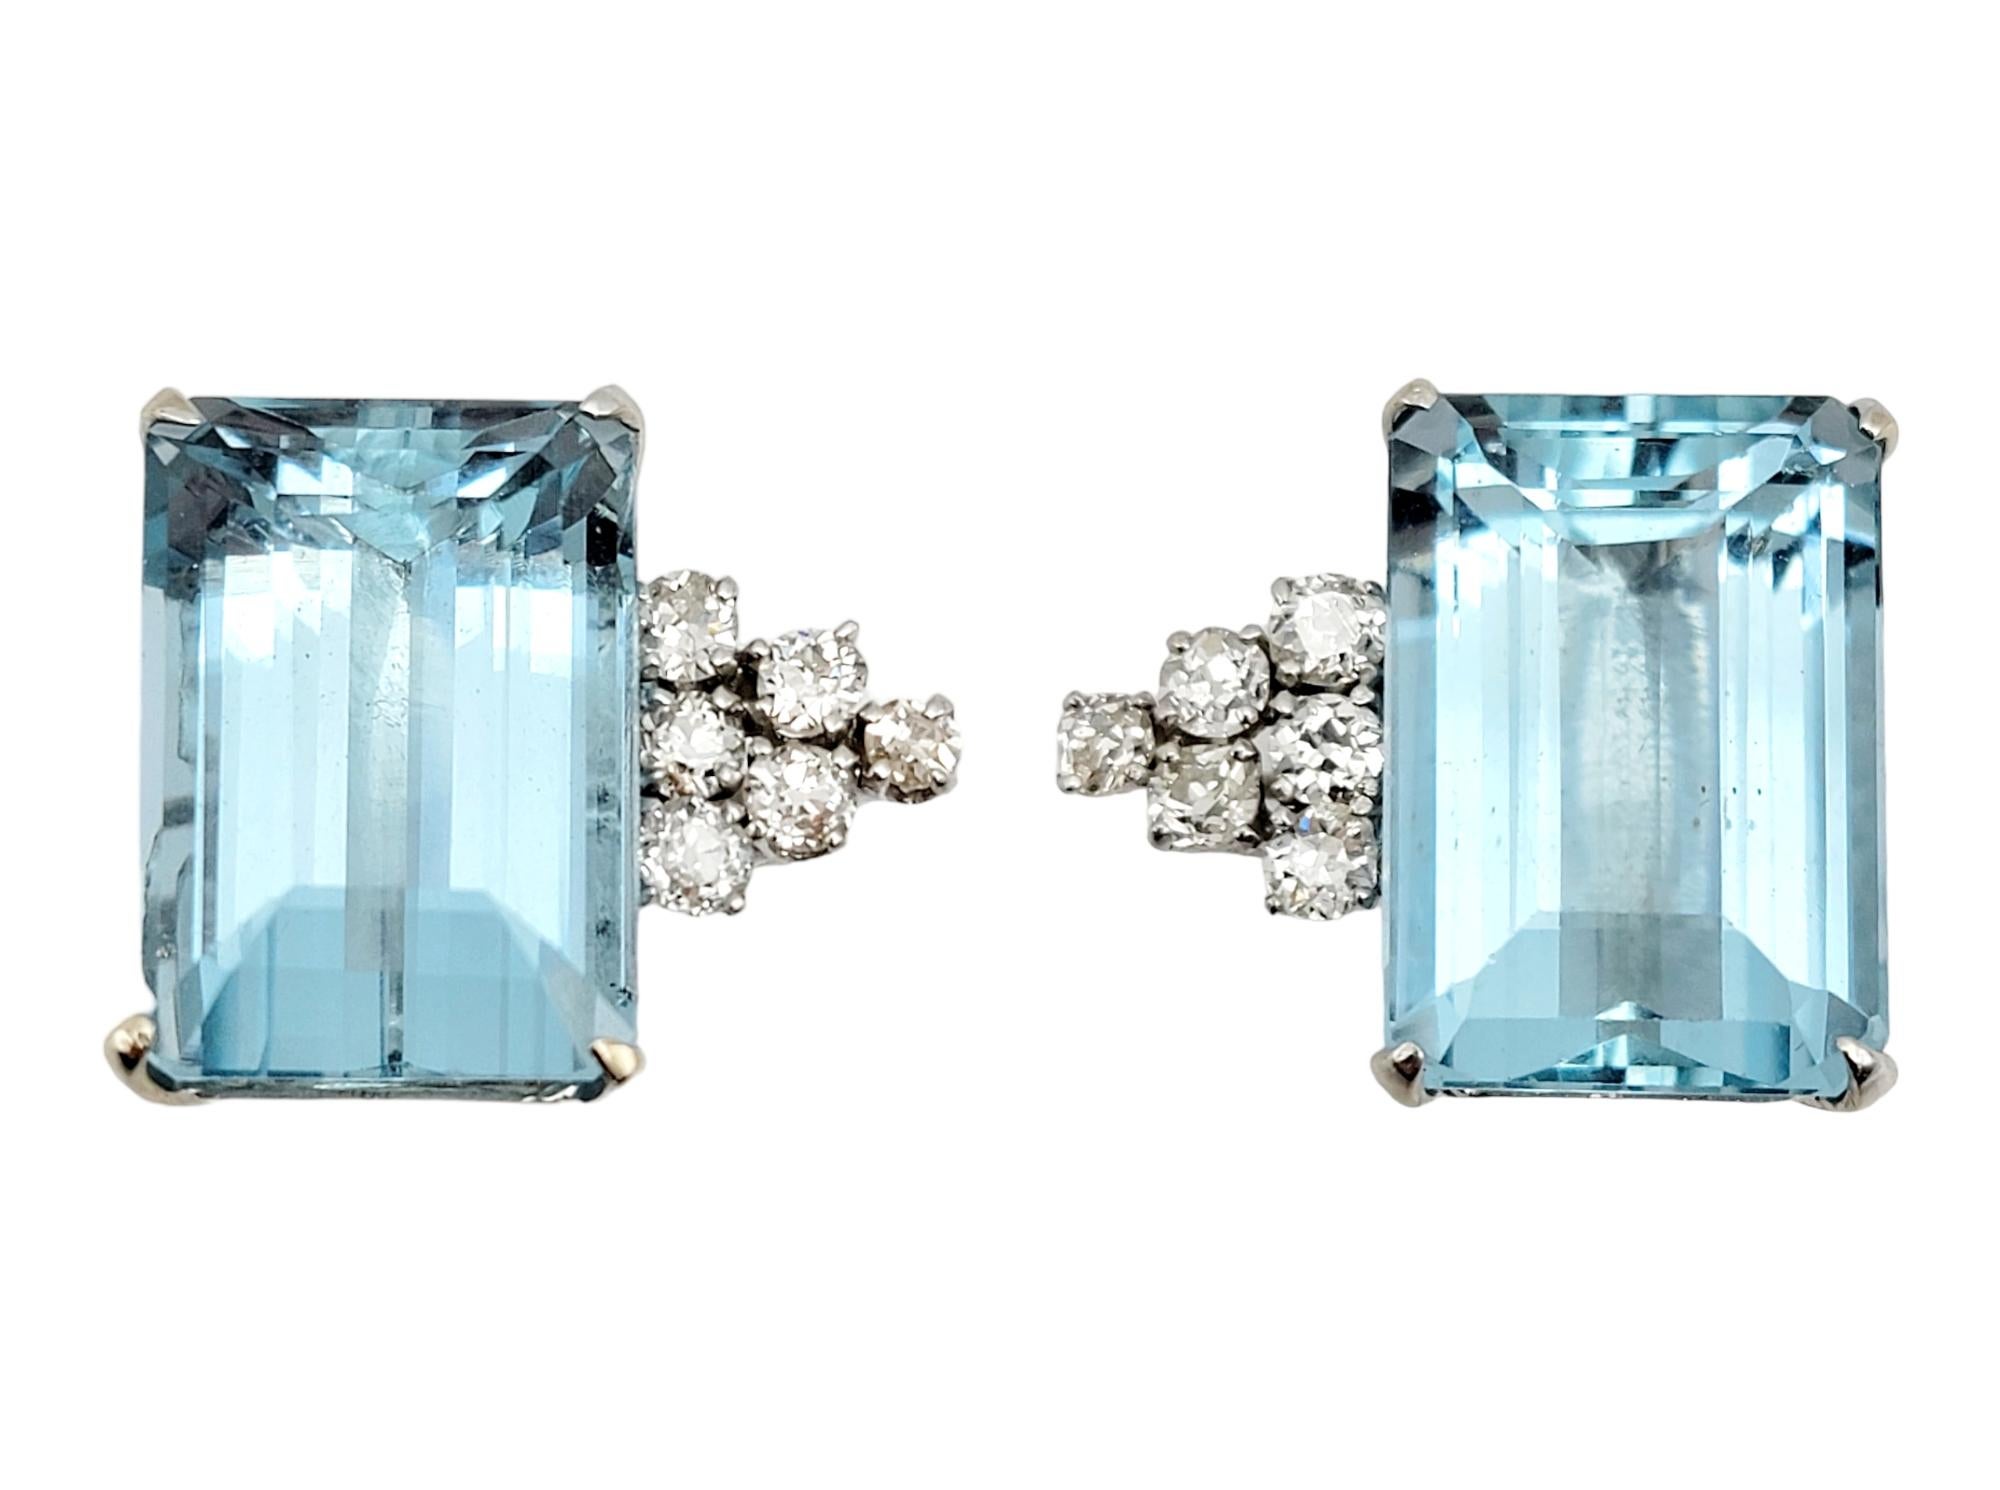 Absolutely stunning vintage diamond and aquamarine earrings. These substantial studs sparkle magnificently on the lobe, shimmering and shining from all angles. 

These gorgeous earrings feature a total of 19.02 carats of incredible emerald cut light